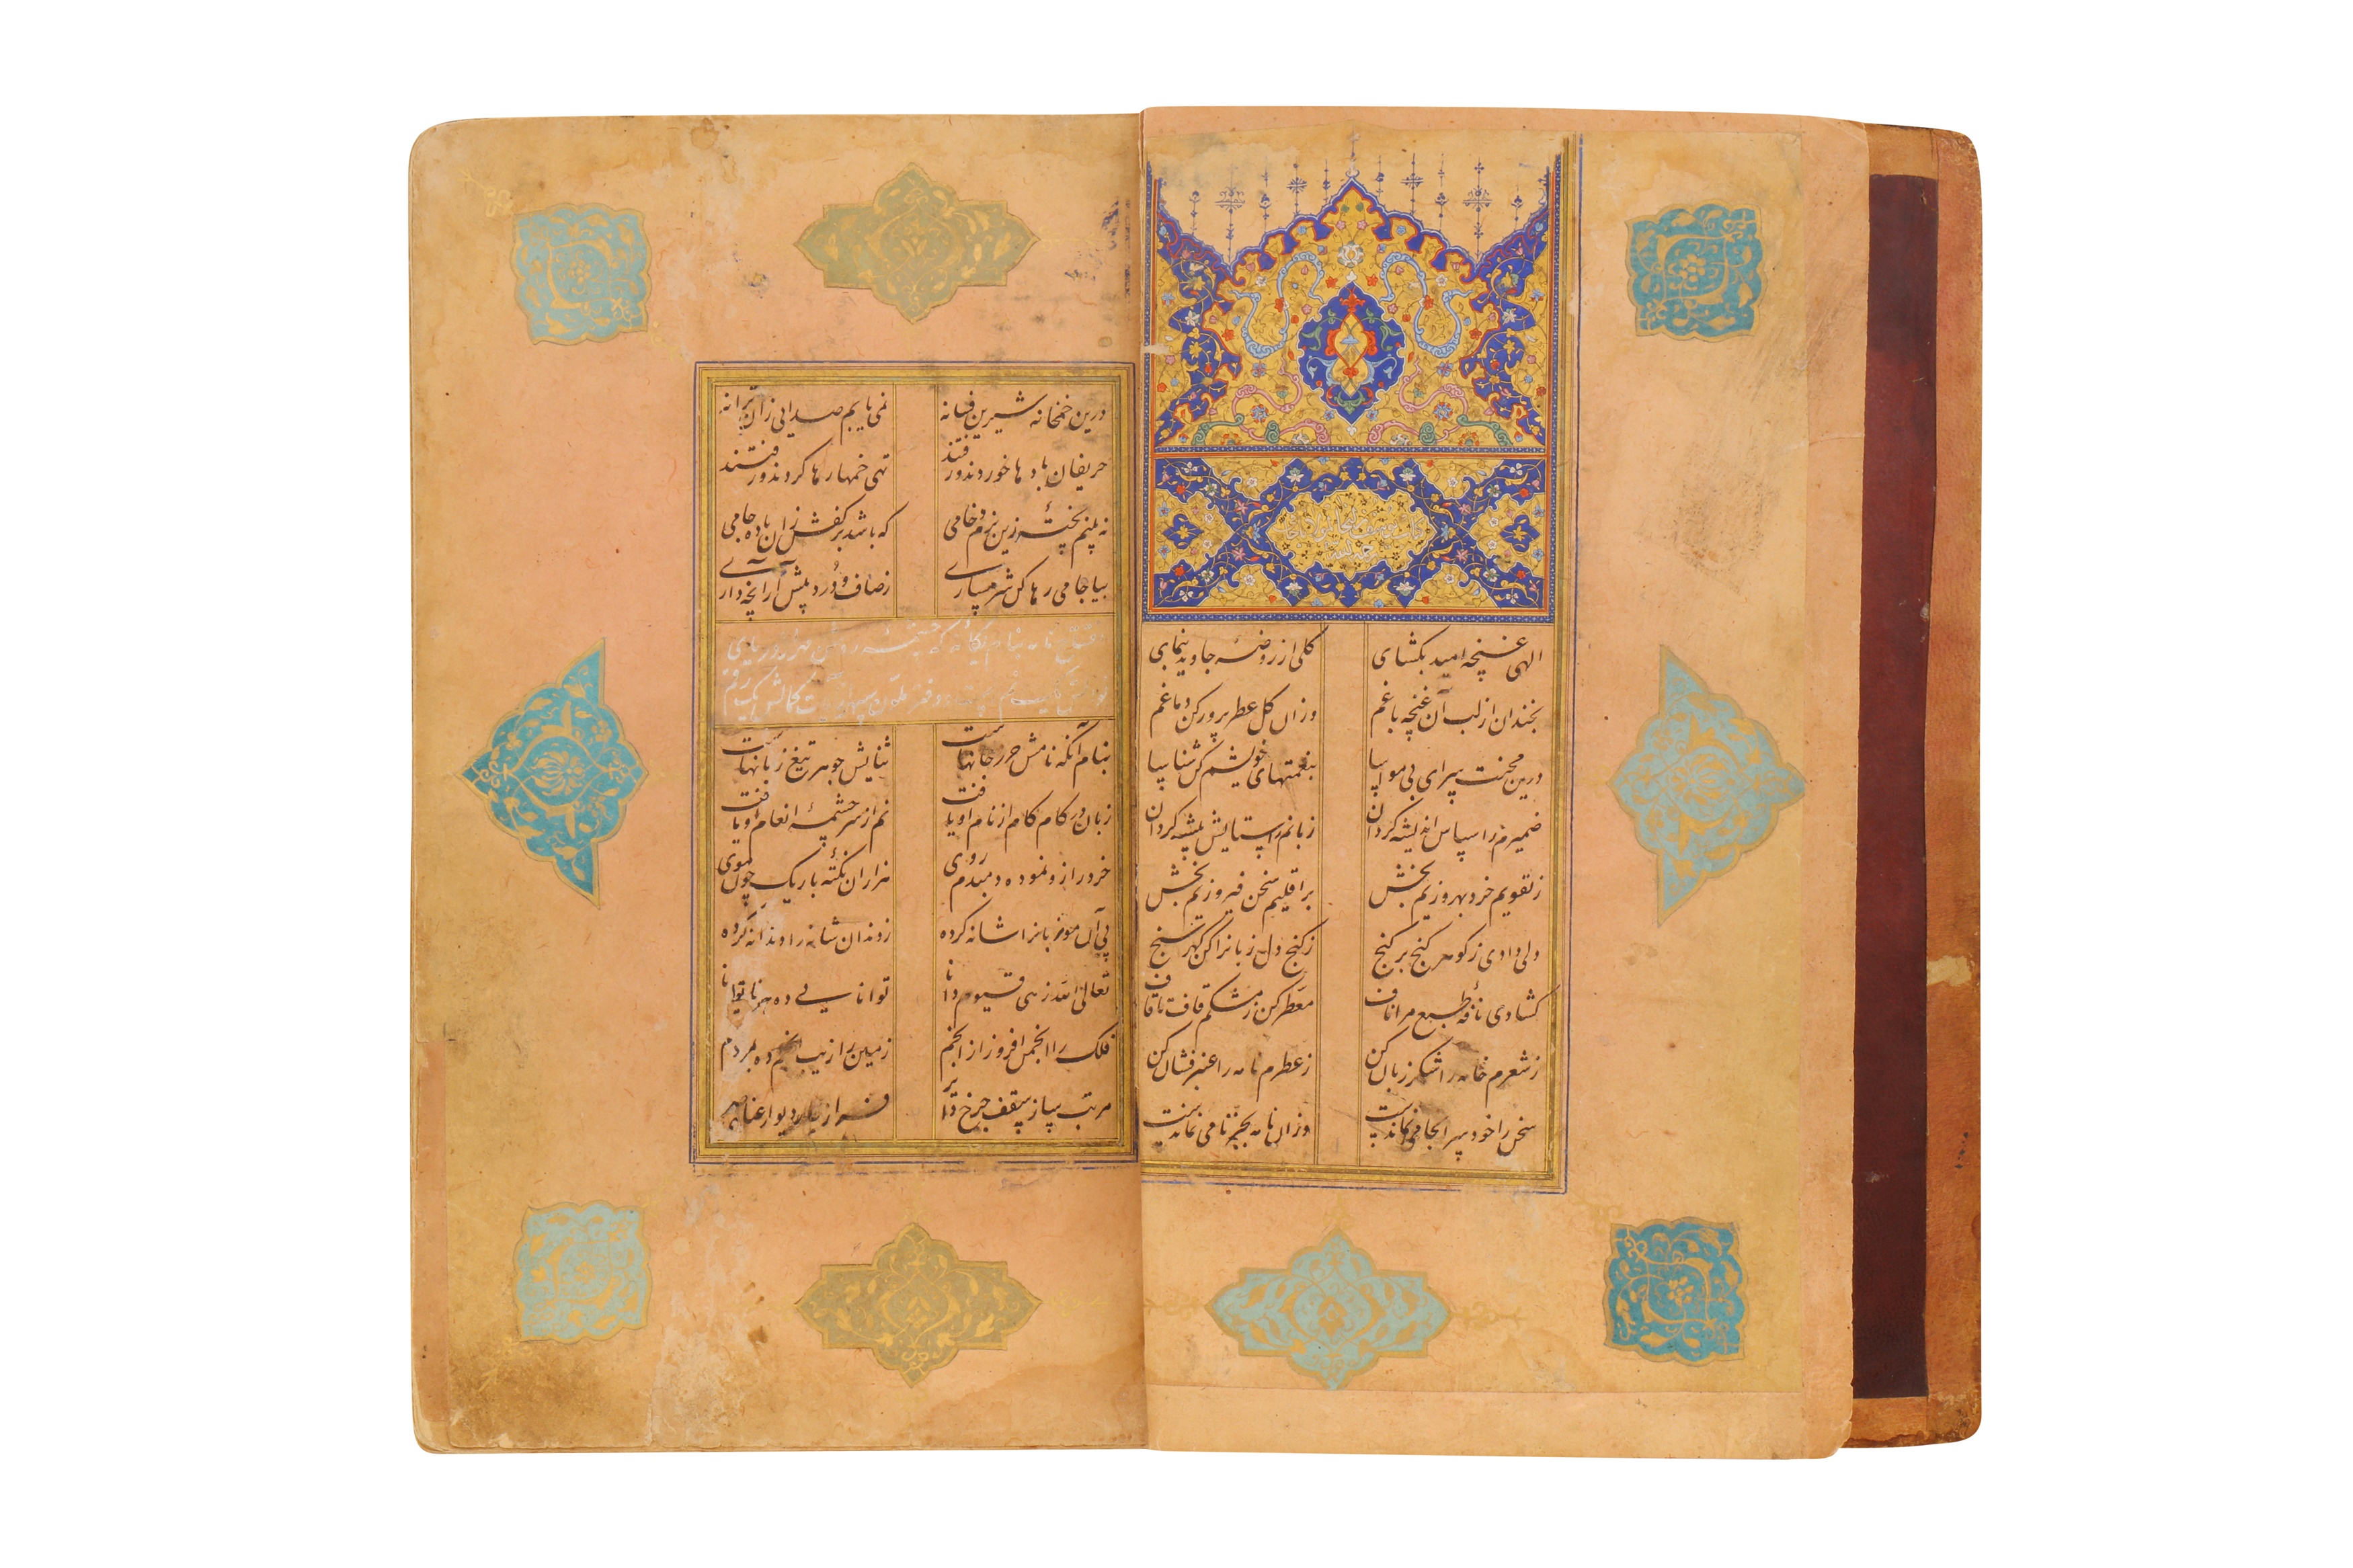 A LATE 16TH/EARLY 17TH CENTURY PERSIAN POETIC MANUSCRIPT - YOUSUF AND ZULAIKA, HAFT AWRANG OF JAMI